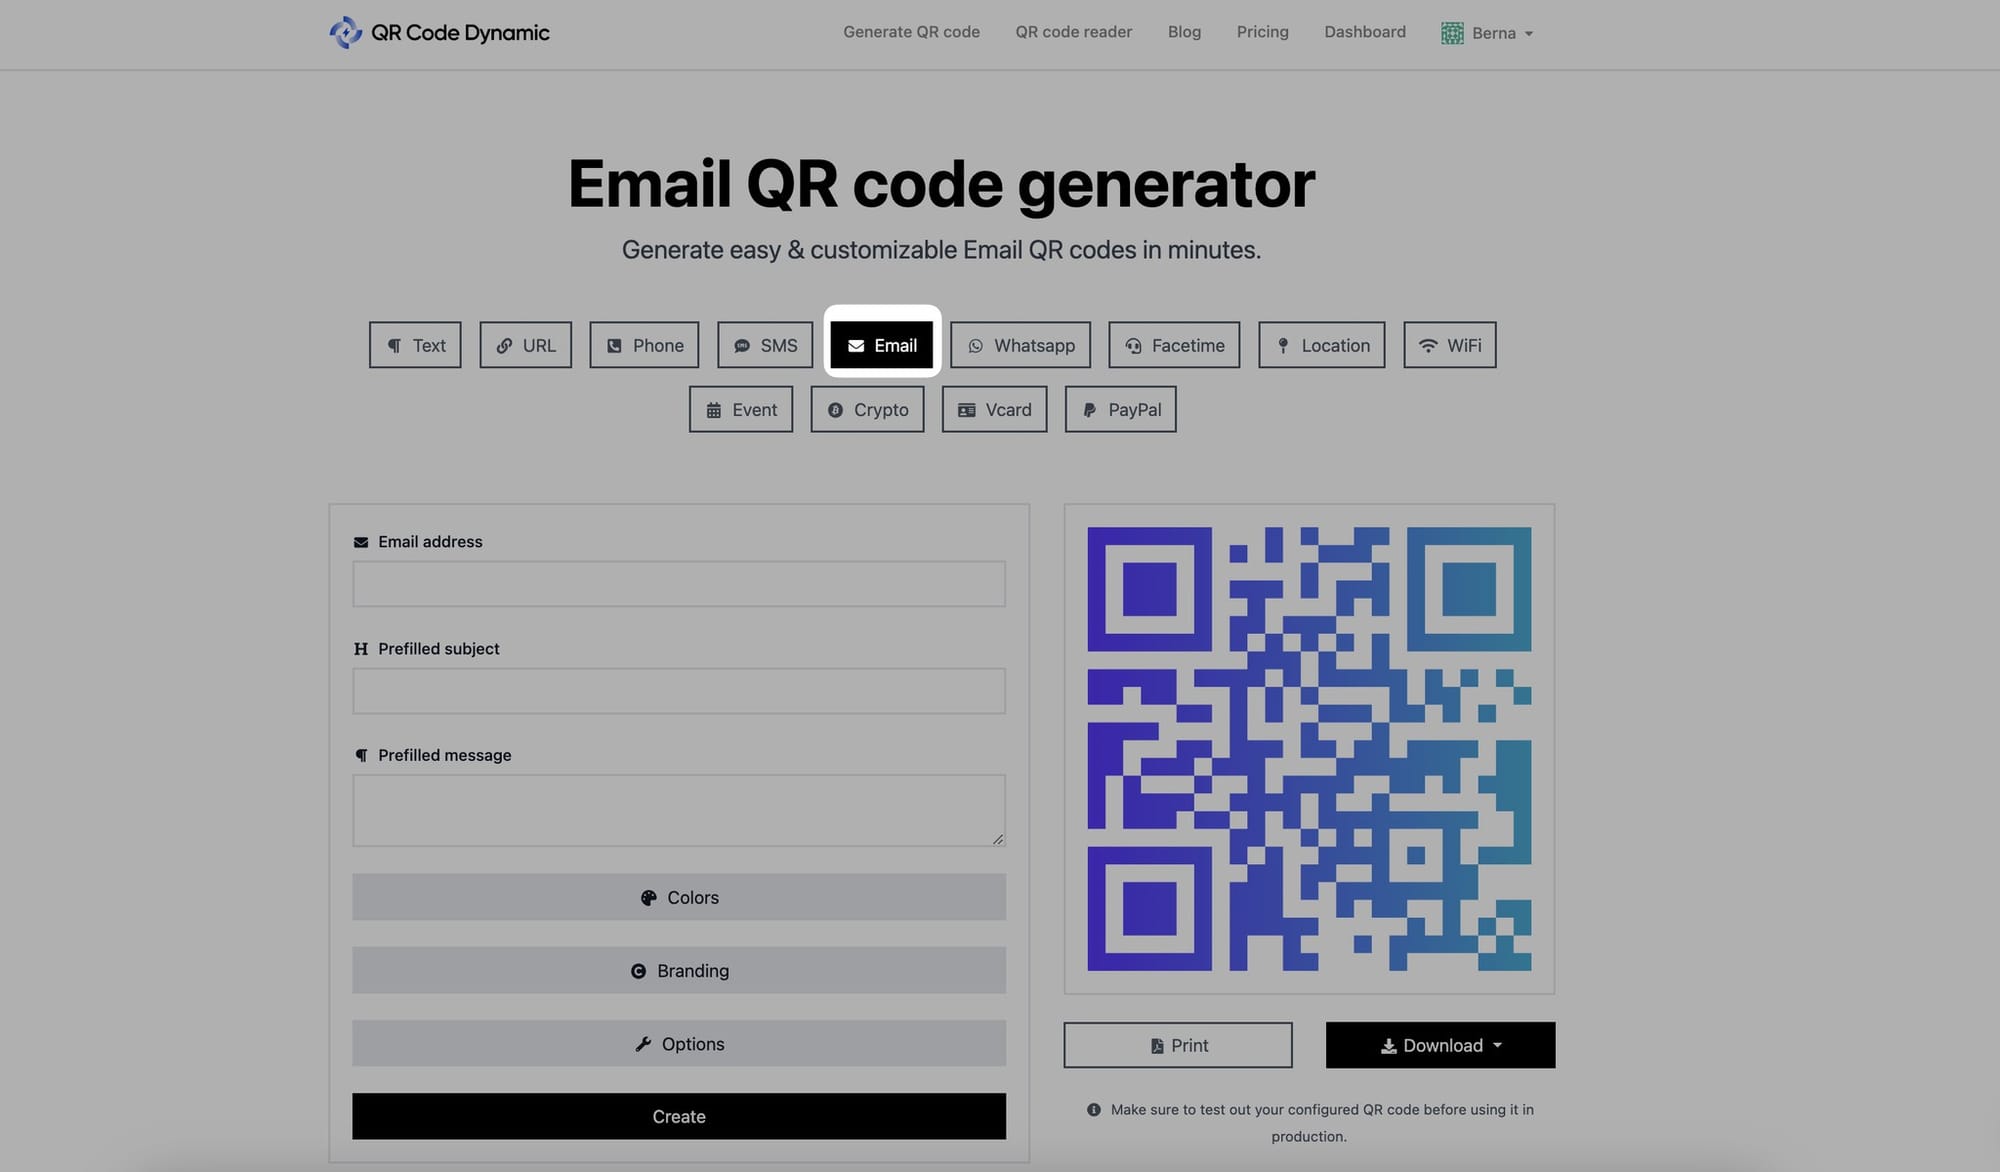 selecting email qr code type from the list